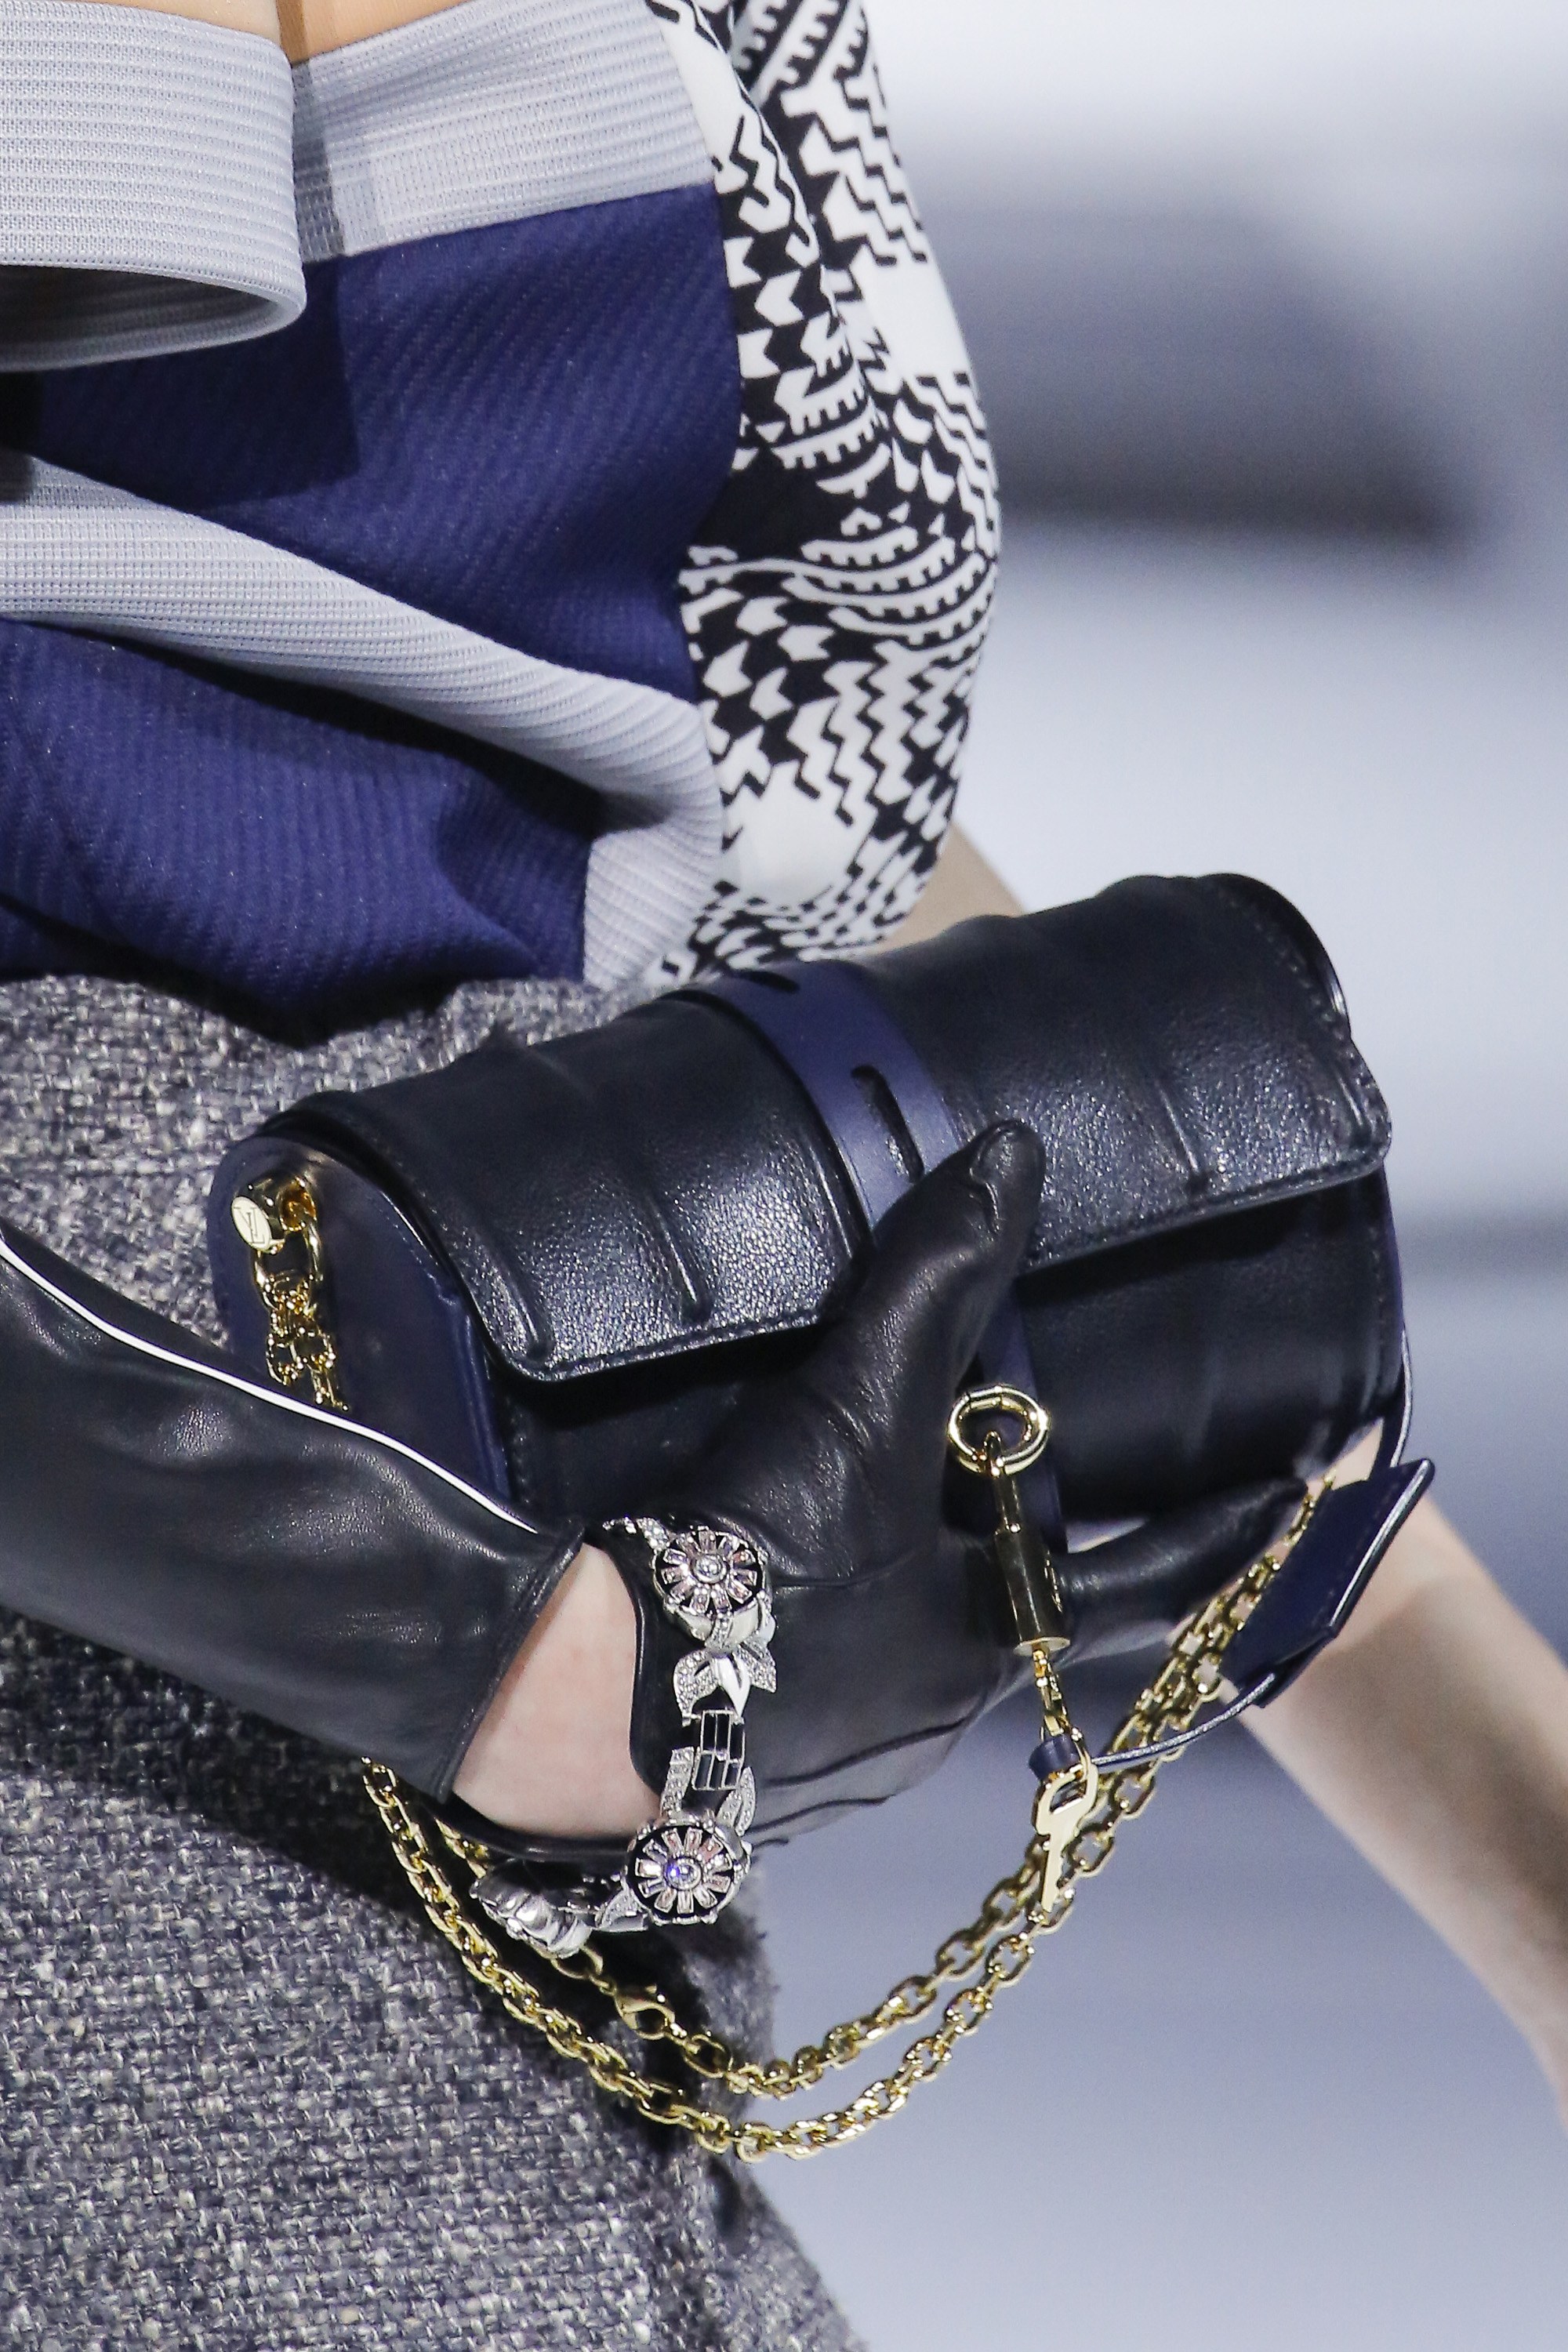 Louis Vuitton Fall/Winter 2018 Runway Bag Collection - Spotted Fashion